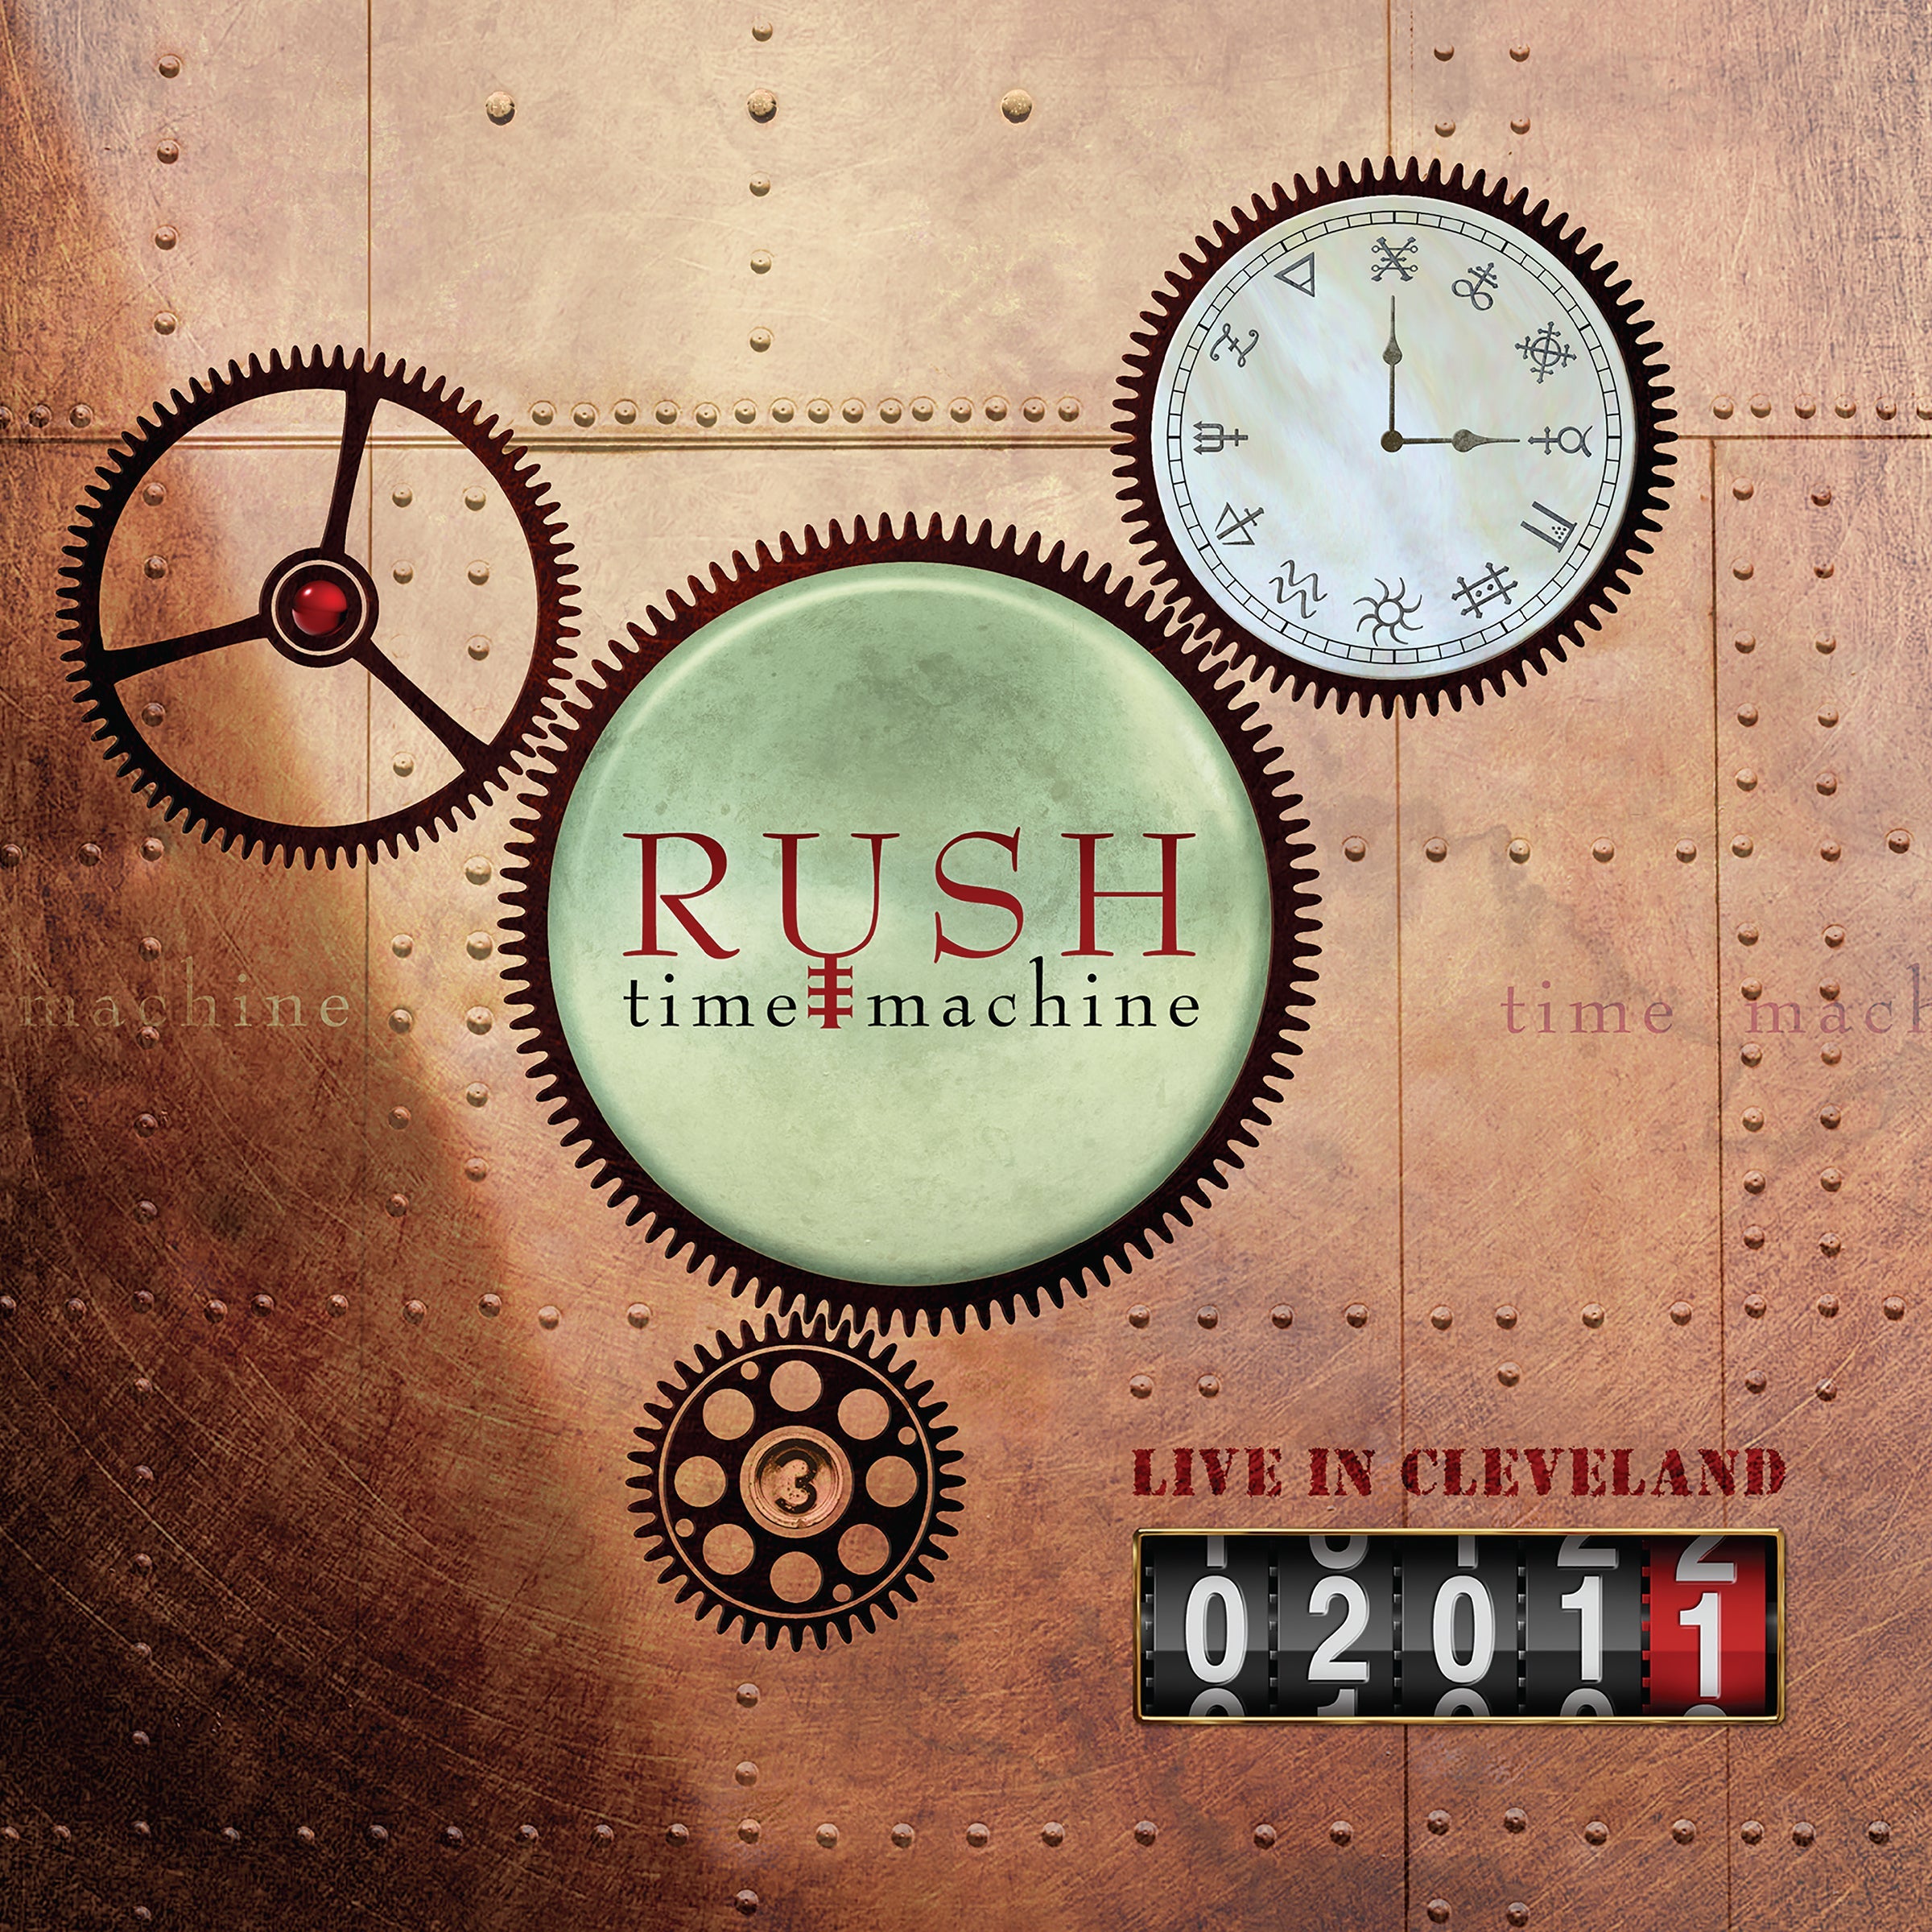 [DAMAGED] Rush - Time Machine 2011: Live In Cleveland